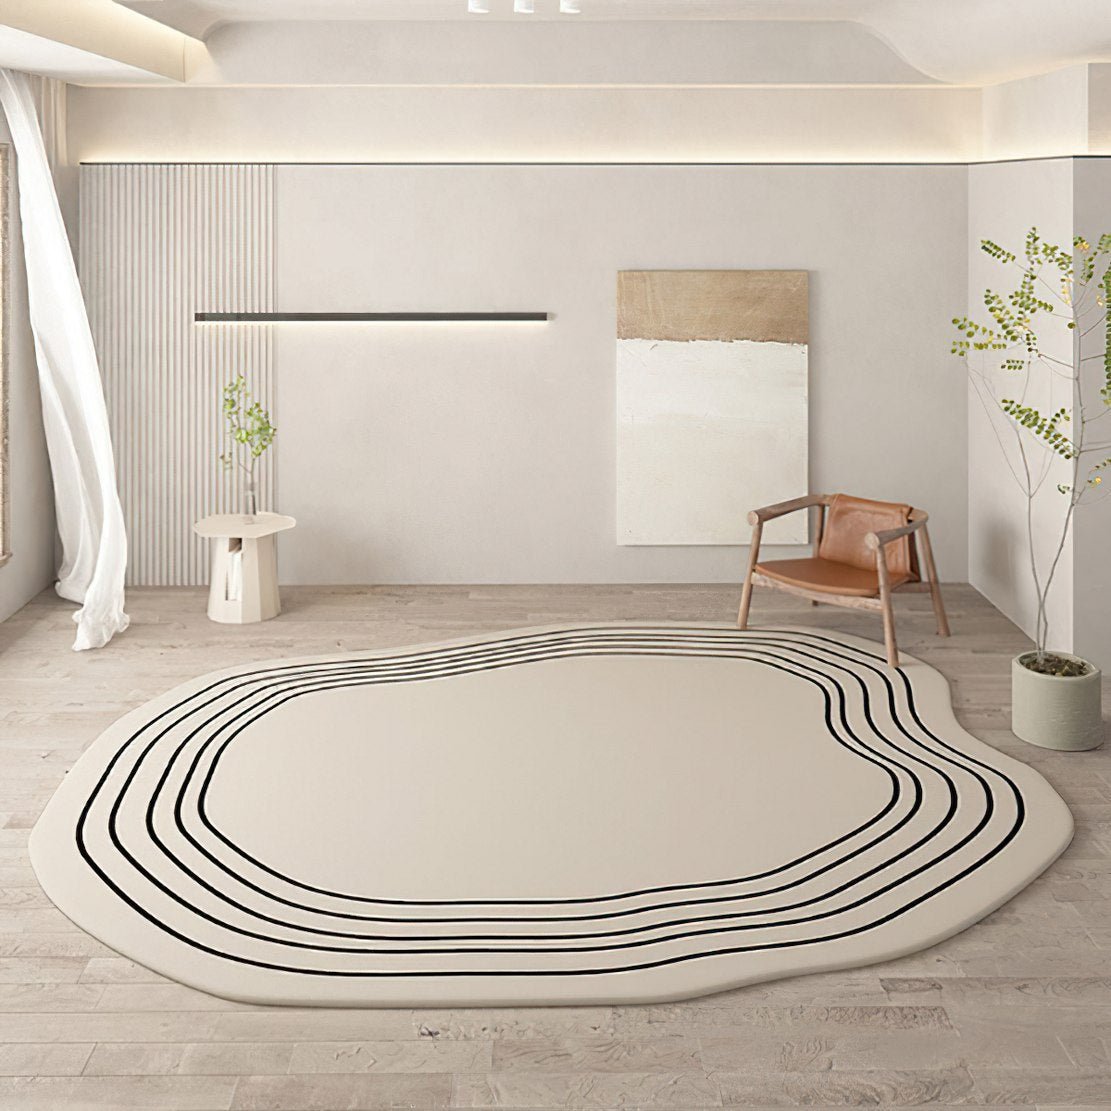 white large round area rug with black lines.